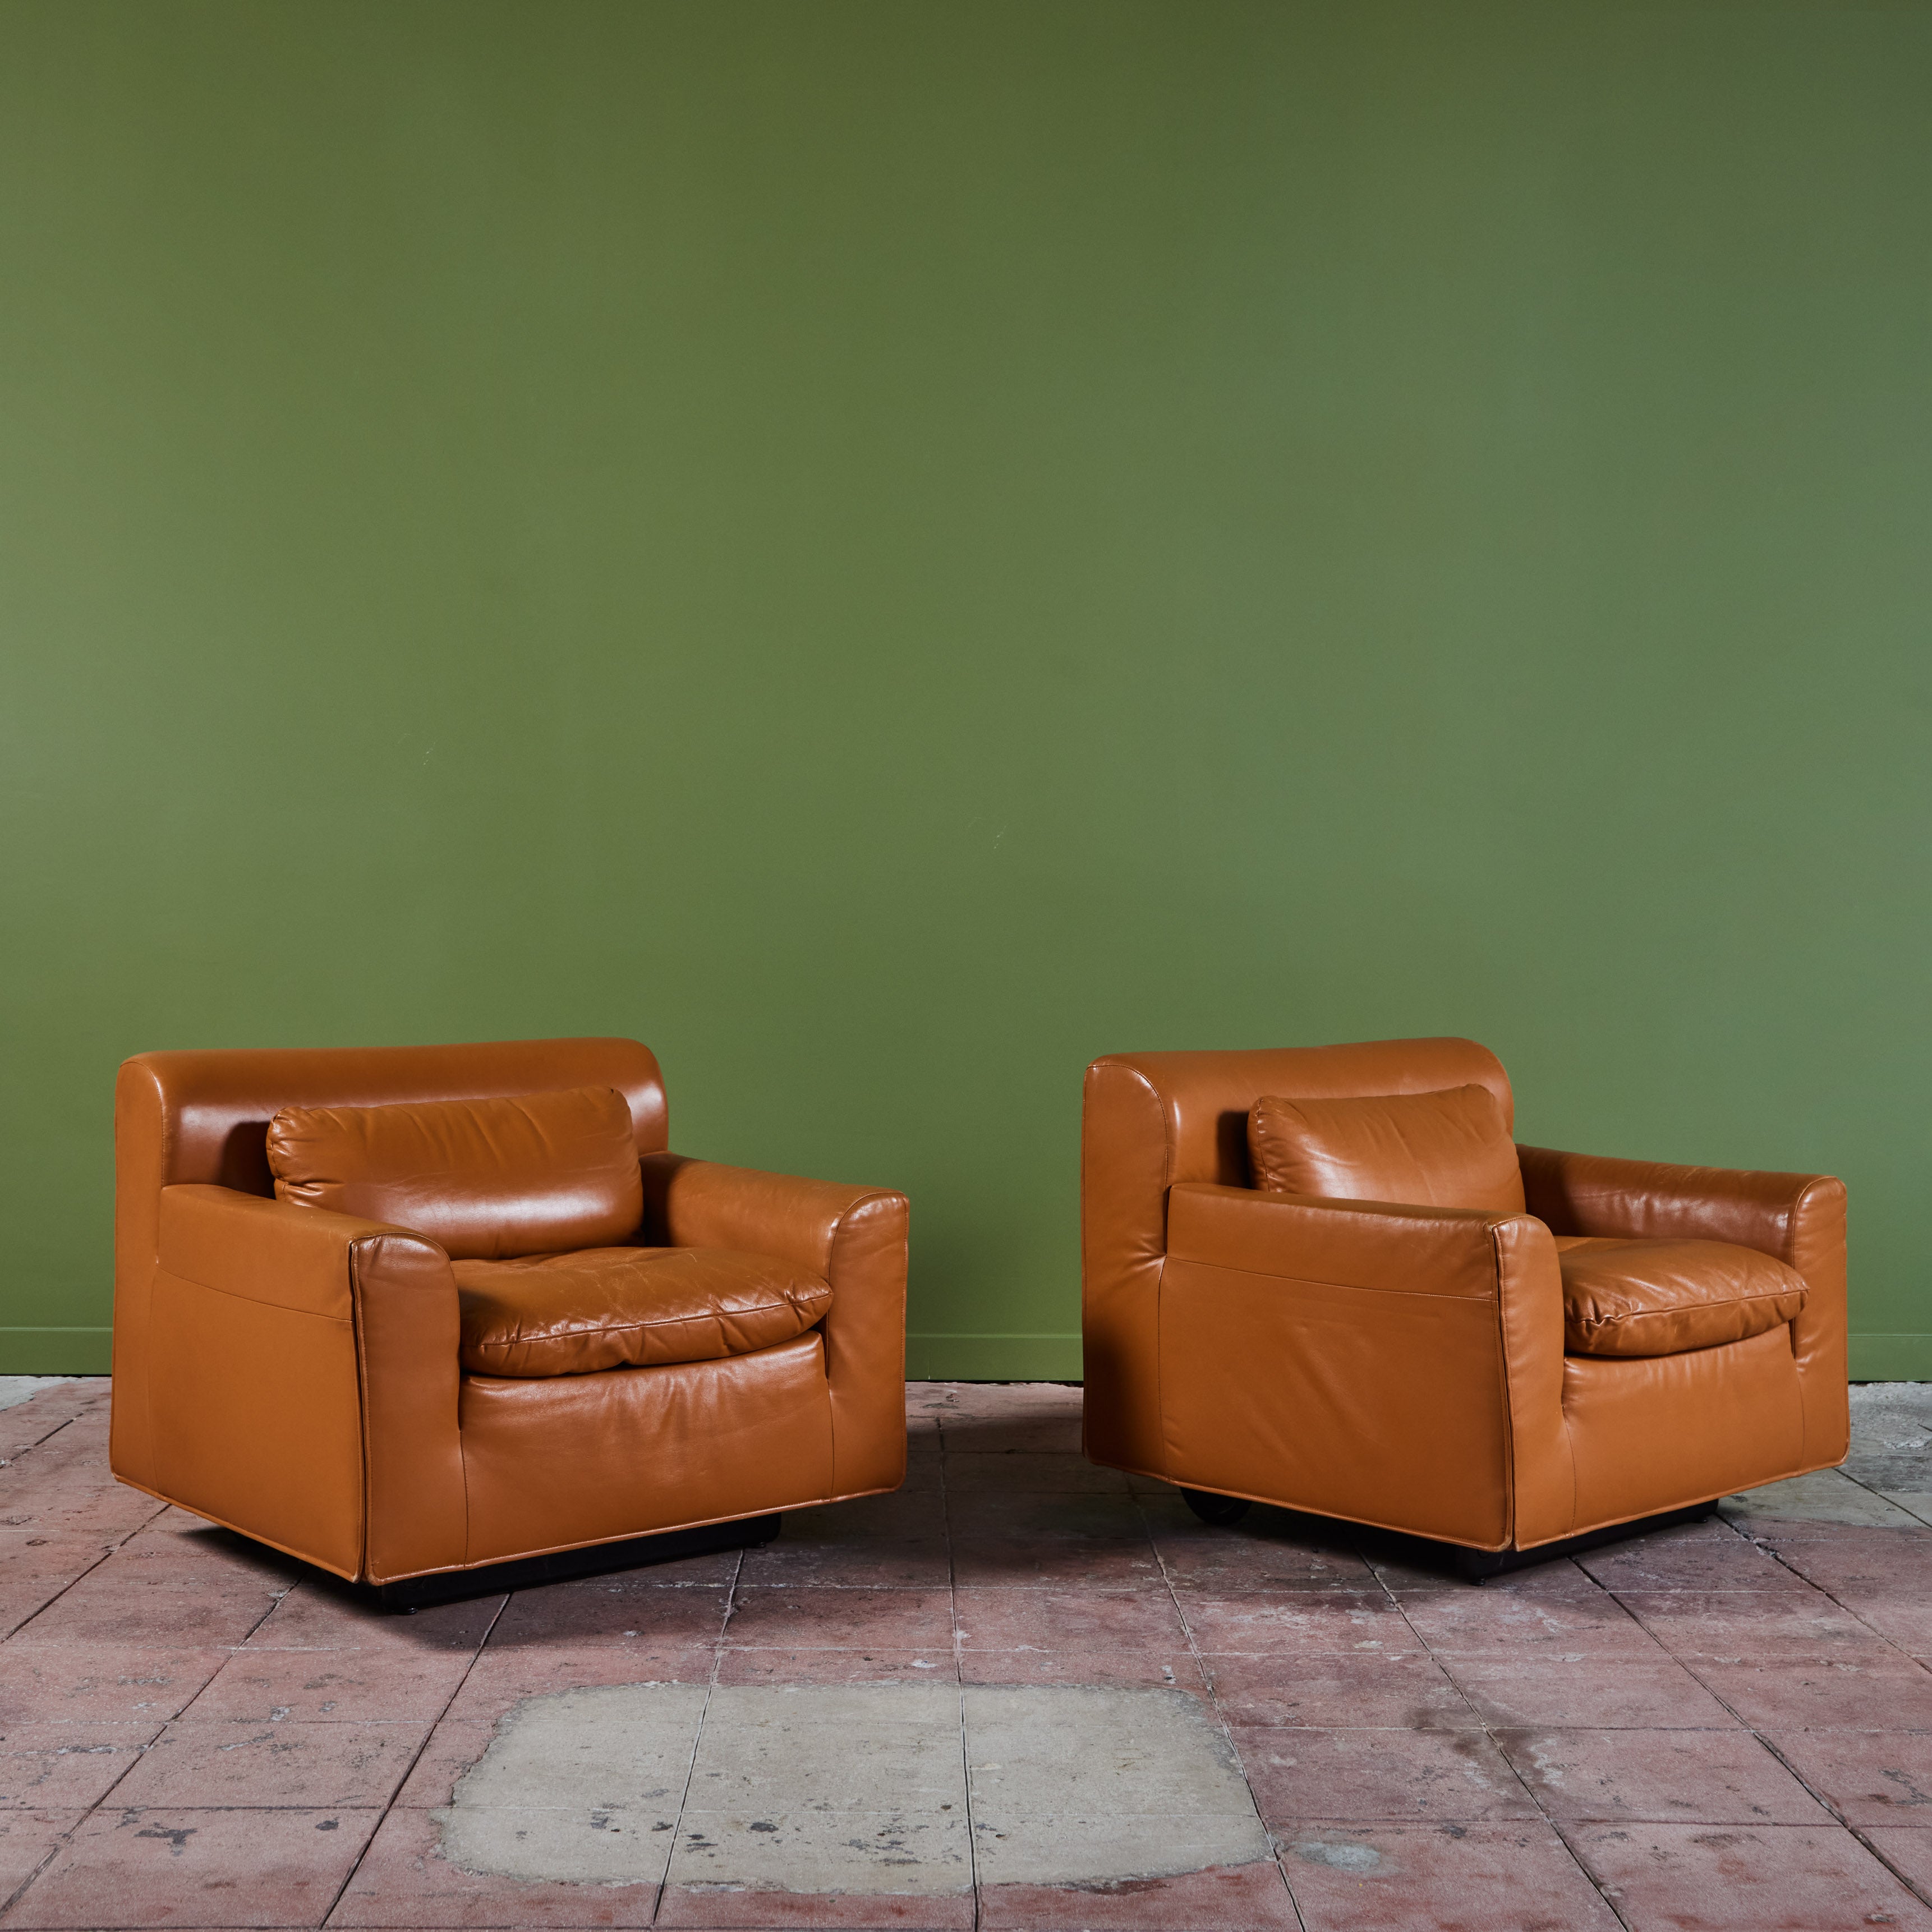 Pair of leather lounge chairs by Otto Zapf for Knoll International, c.1990s, USA. The plush lounge chairs feature original deep camel leather upholstery and cushions. The armrests and backrests have a slight rounded curve and stitched detailing. The